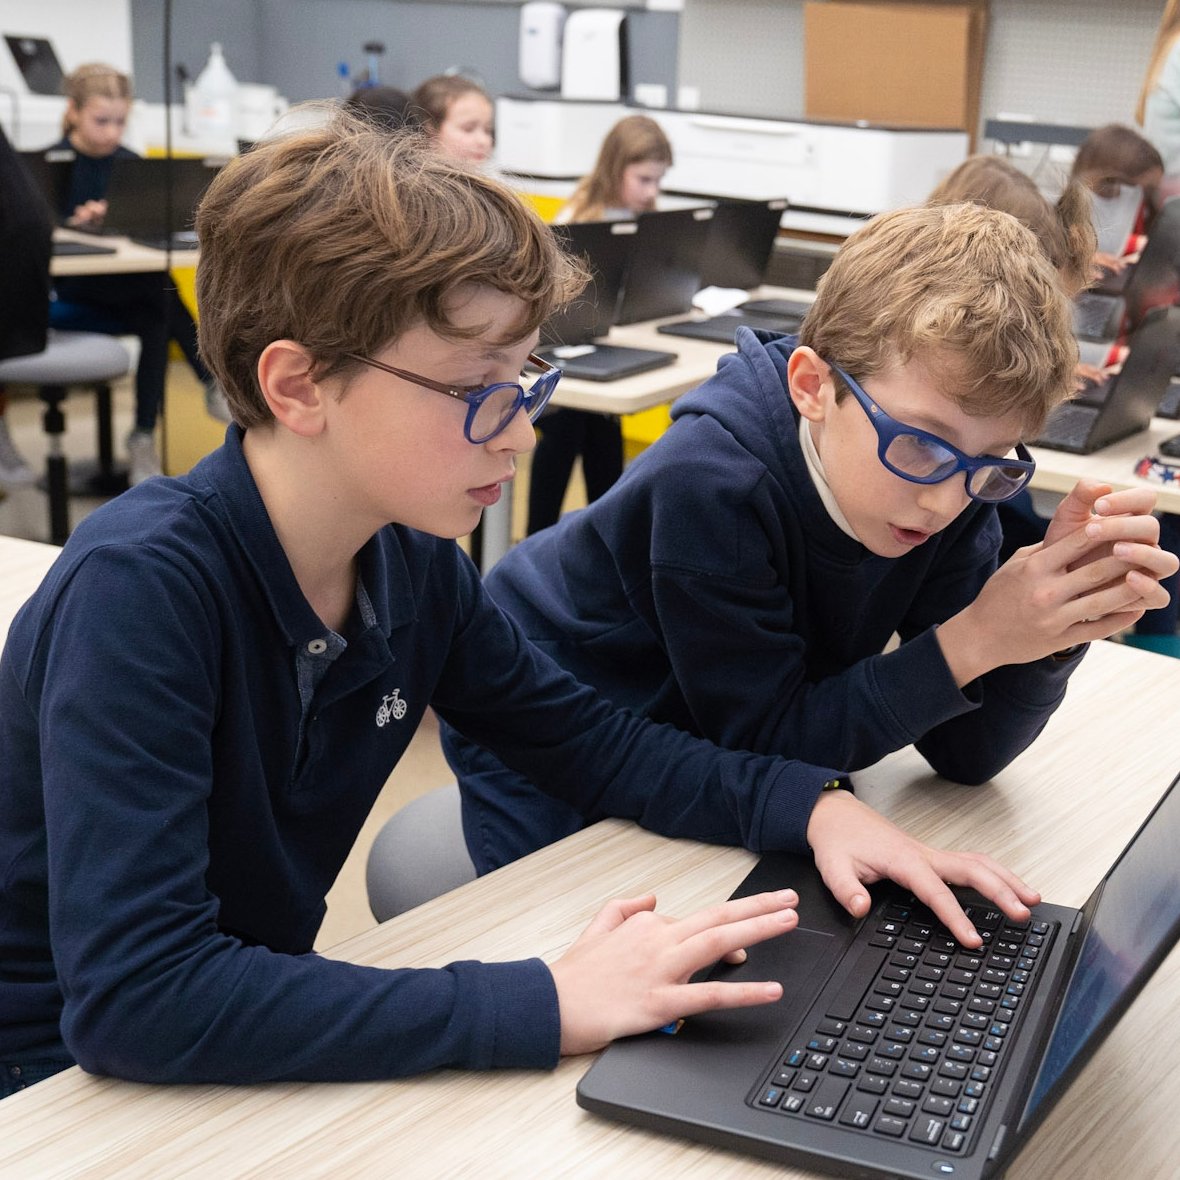 Our 4th graders are putting their minds to the test with Minetest, an open-source version of Minecraft that allows them to digitally reproduce local historical monuments. This year, students will recreate the NBC Tower! #STEAM #LycéeJourney